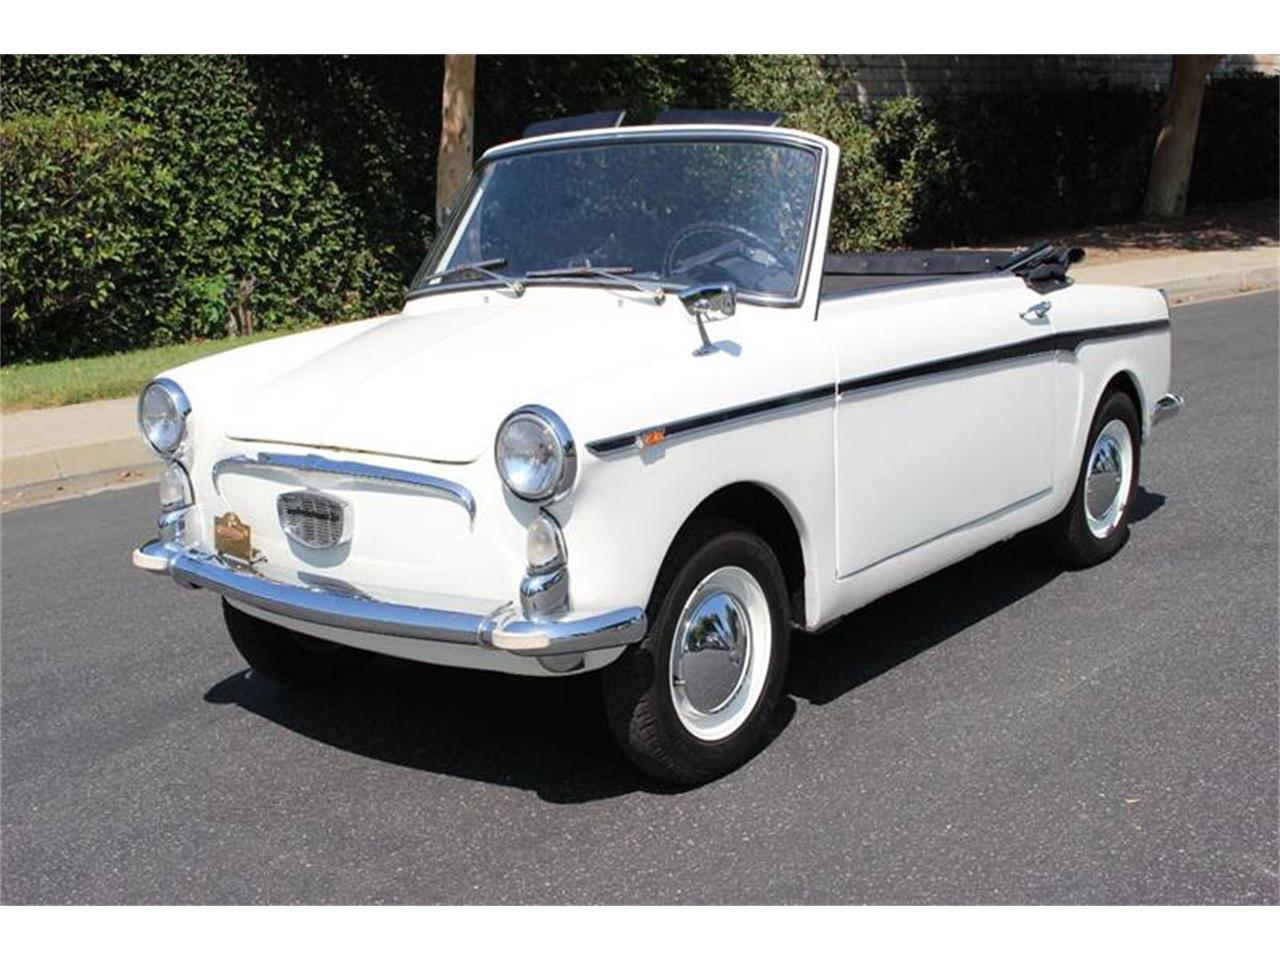 1964 autobianchi bianchina cabriolet for sale classiccars com cc 1022586 1964 autobianchi bianchina cabriolet